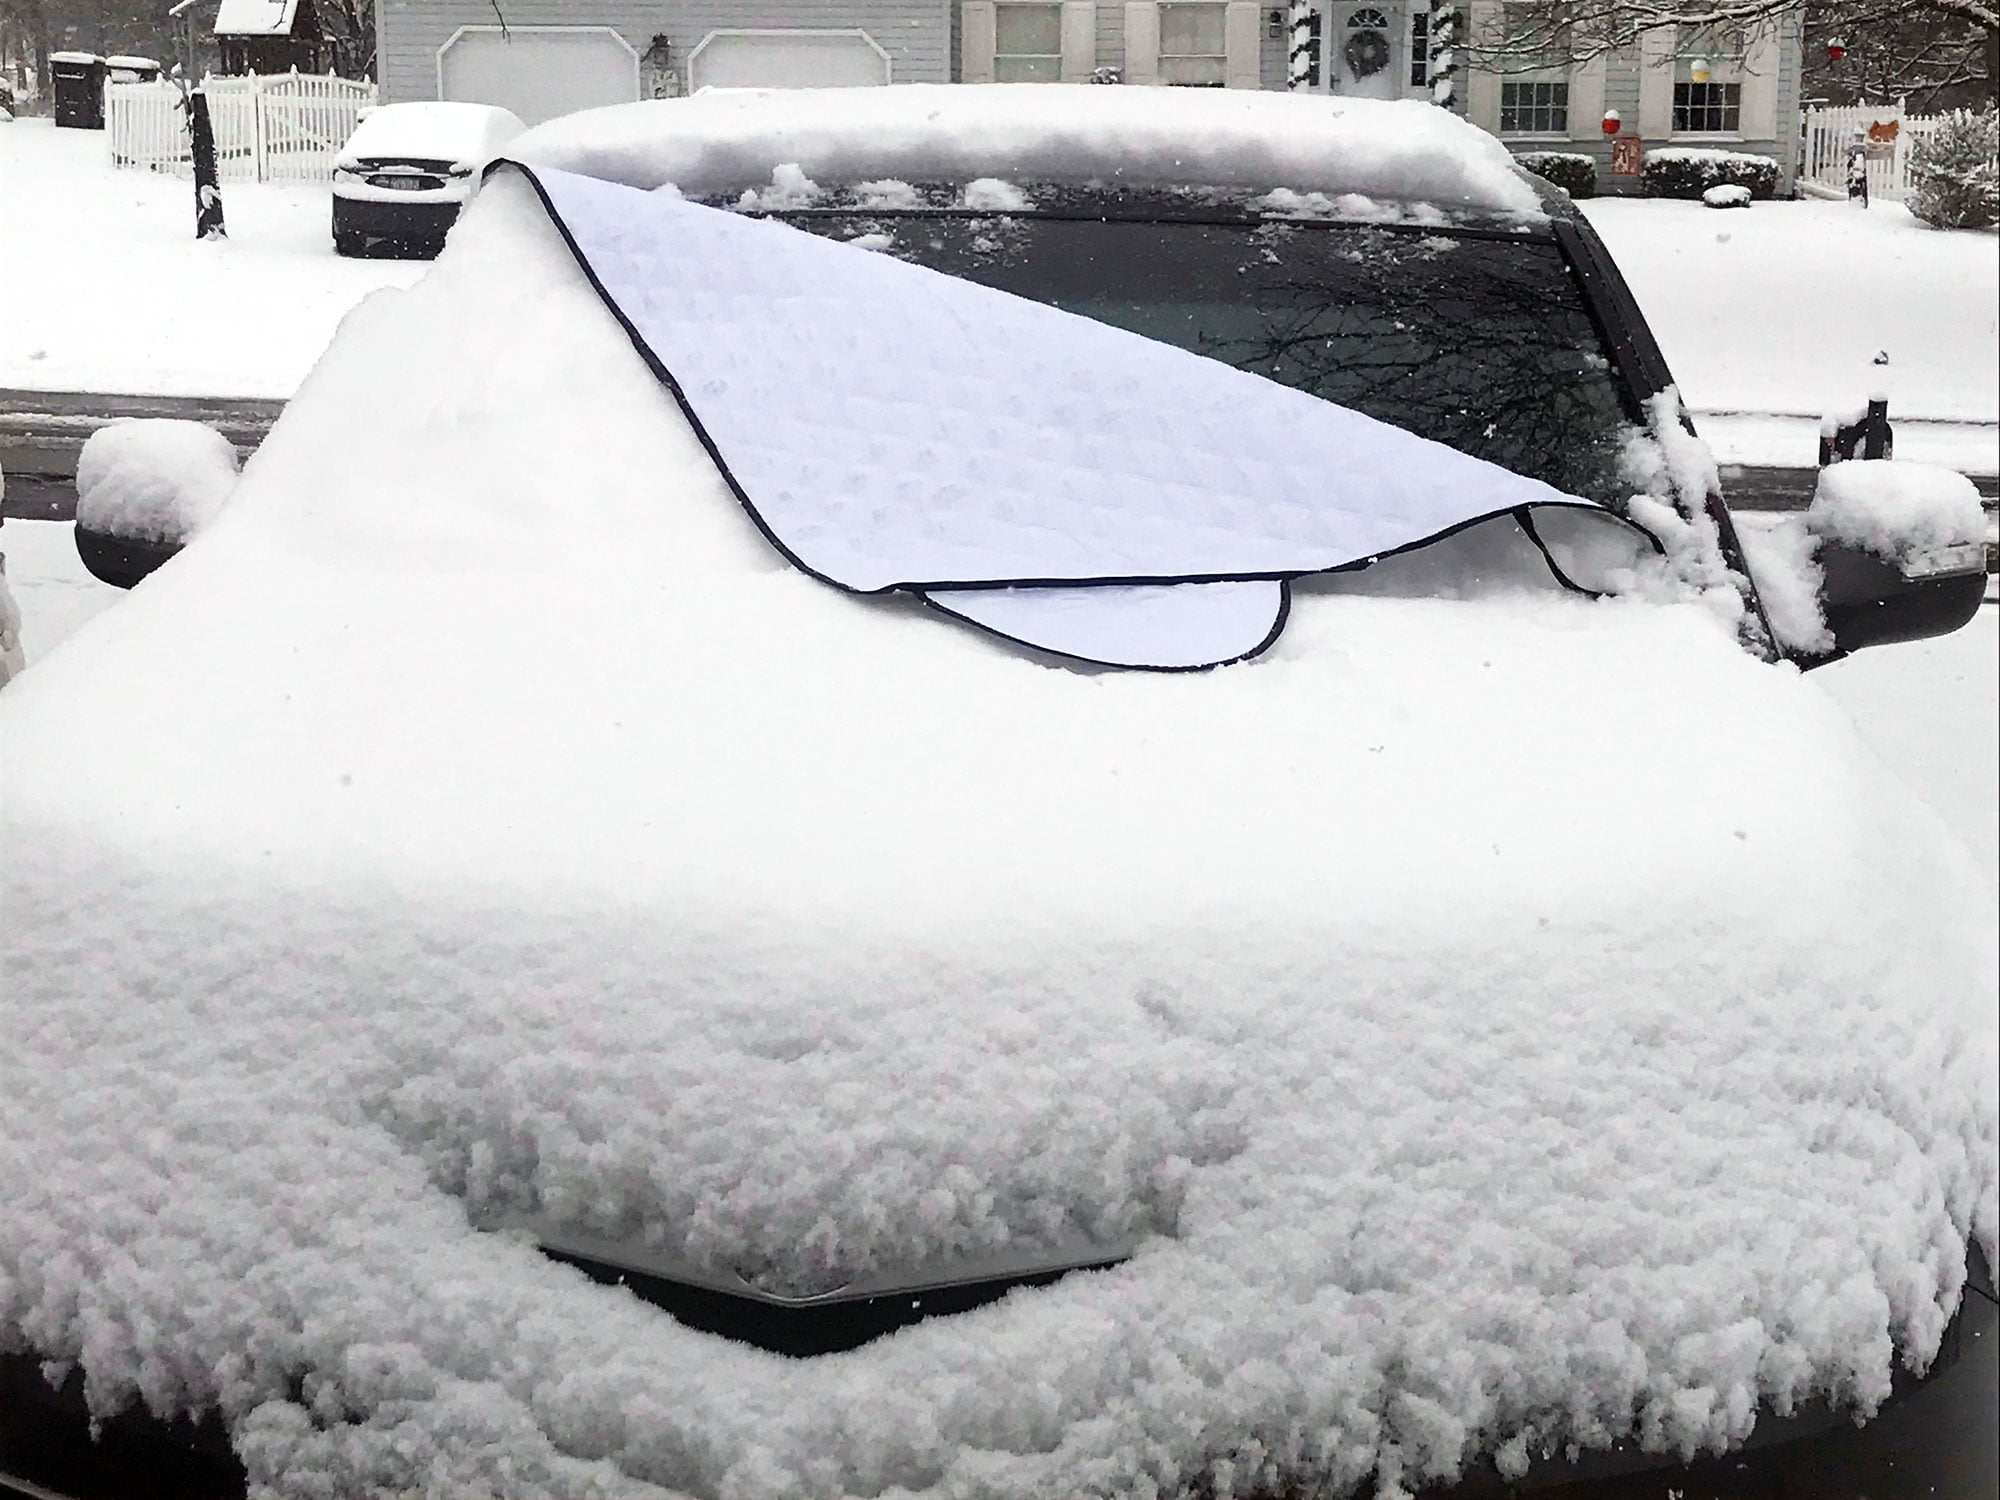 How To Choose The Right Car Windshield Covers For Snow And Ice, by  Iceandsunshield